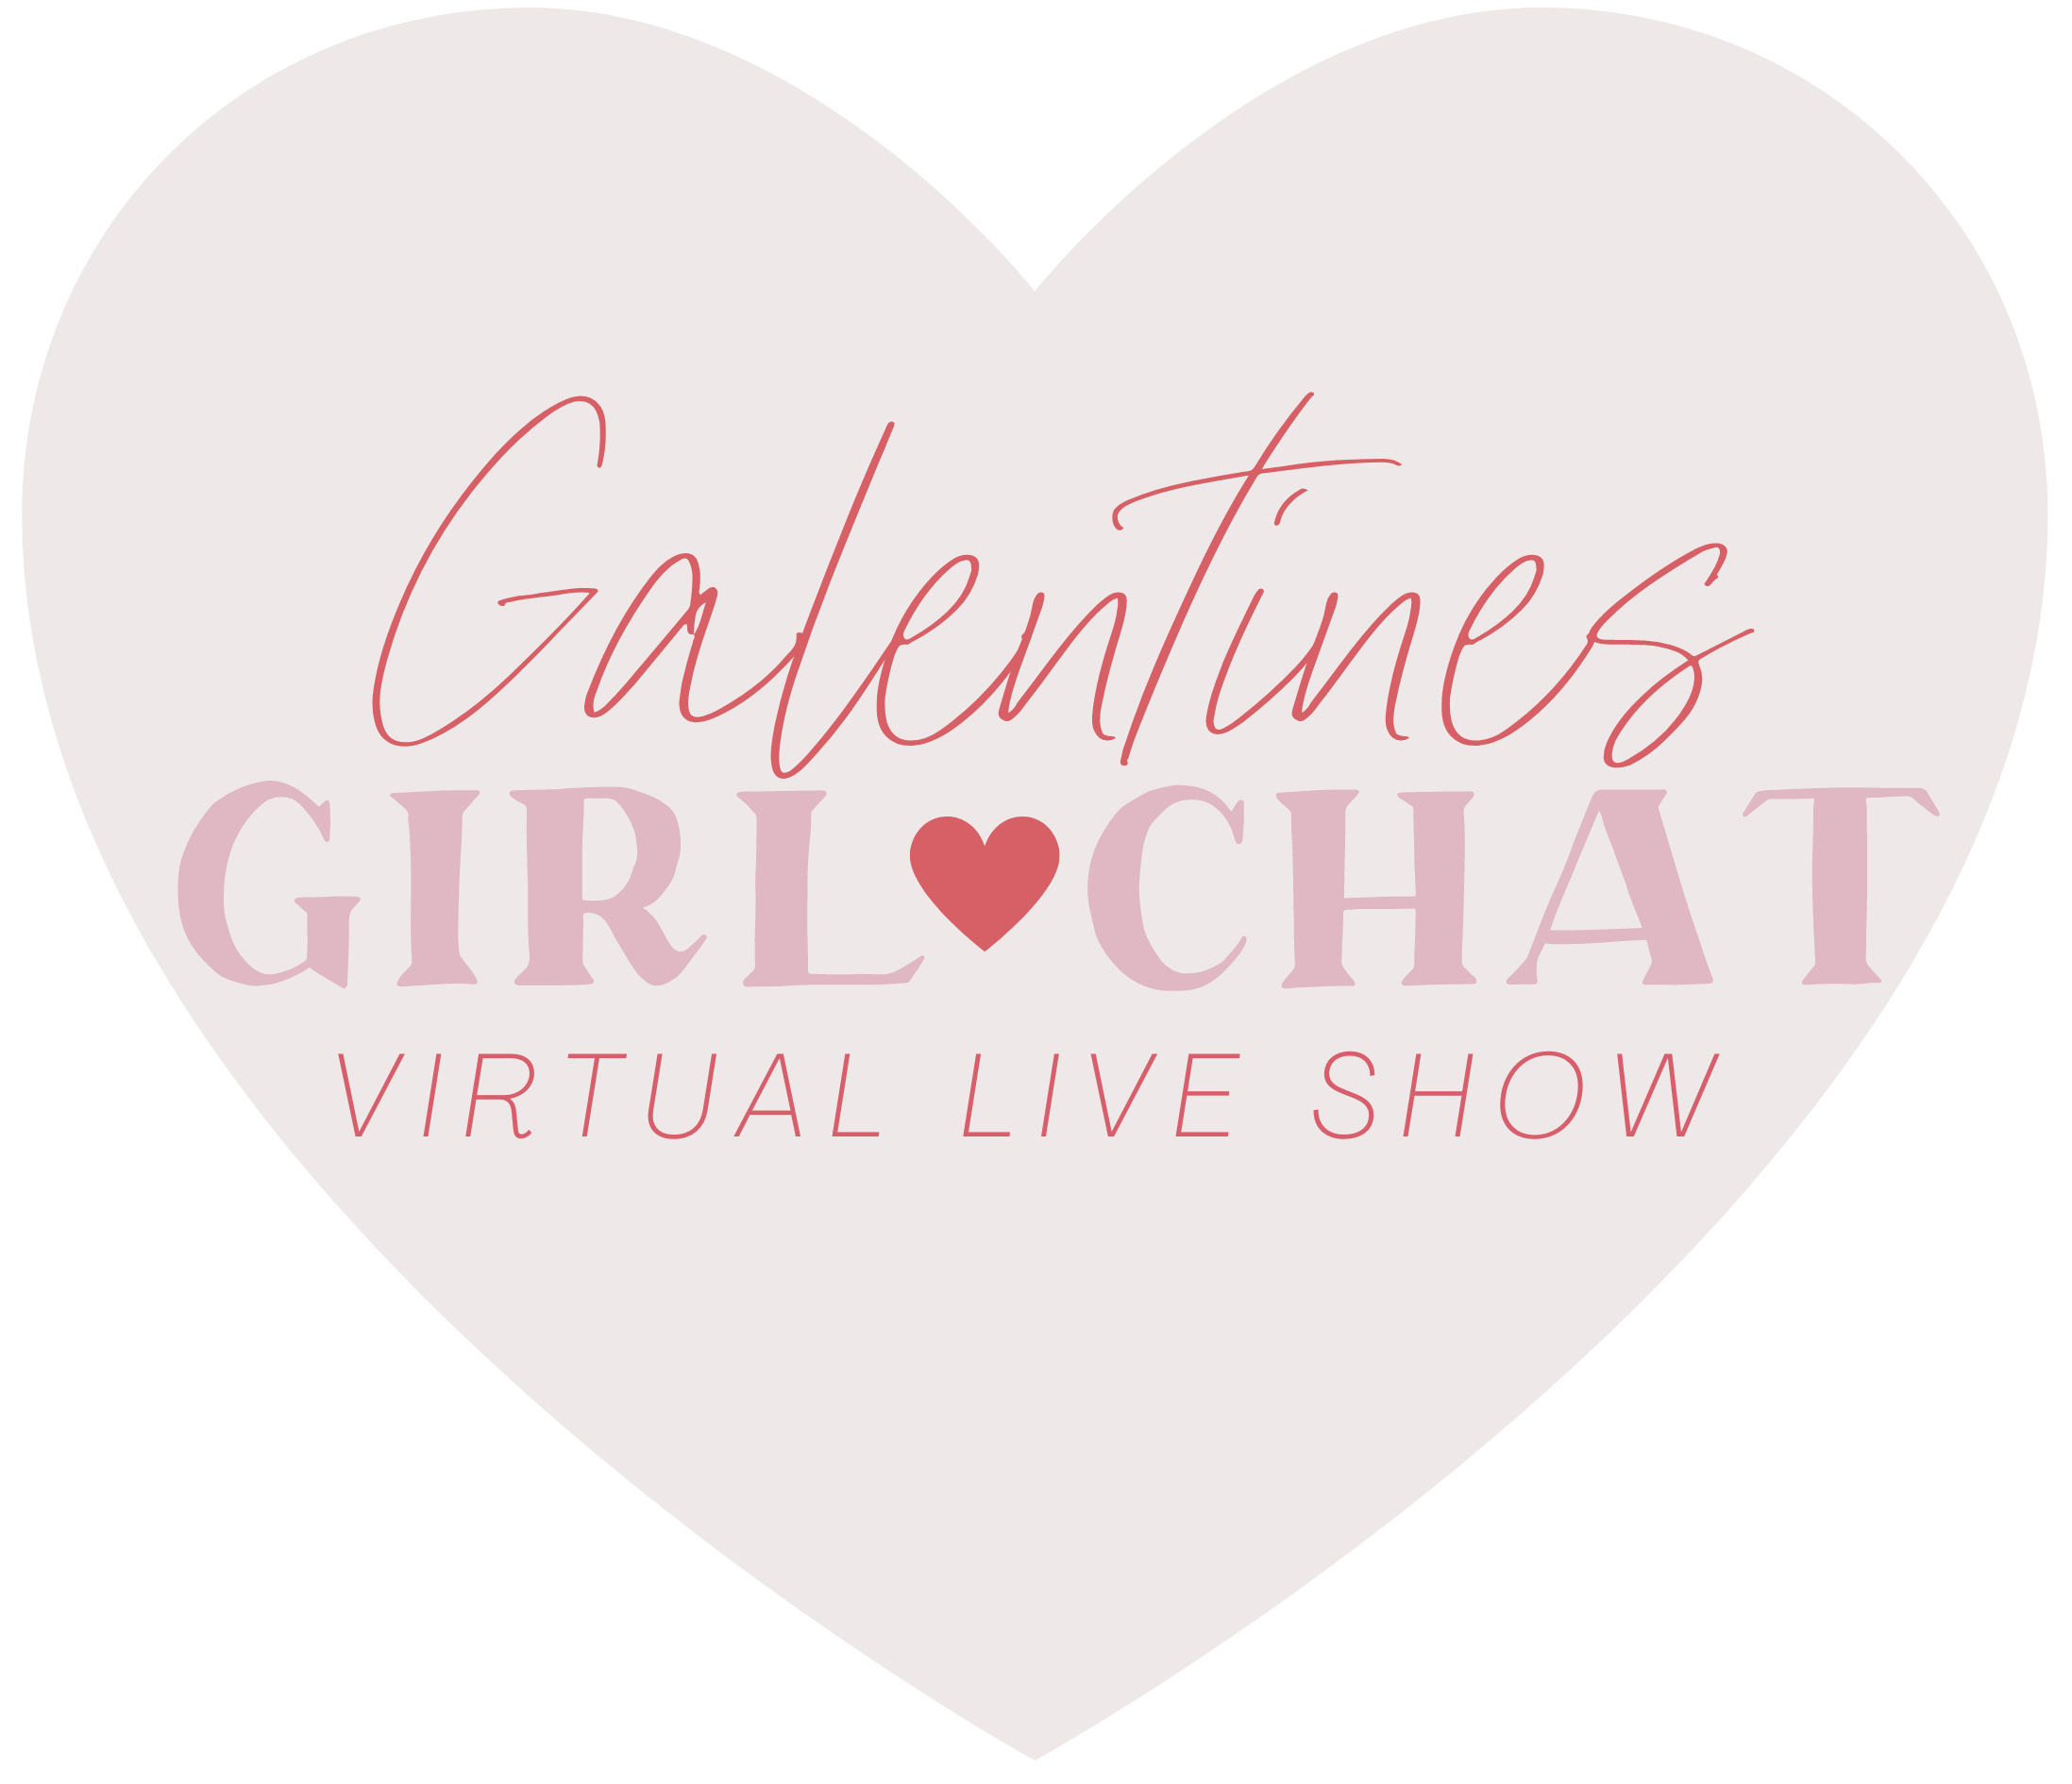 Galentines girl chat (12).png